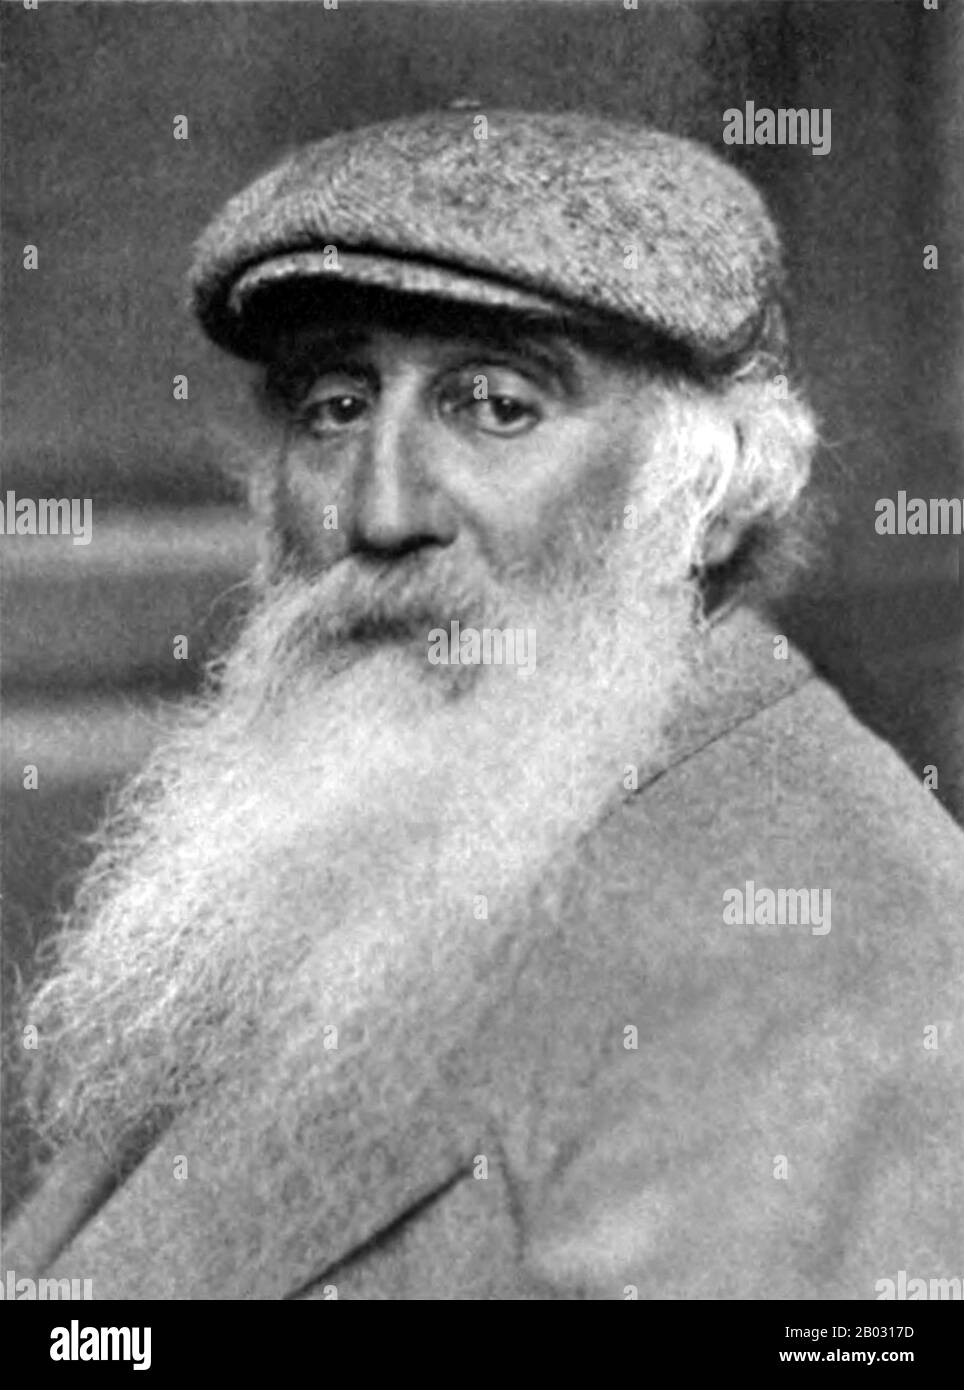 Camille Pissarro (French: (10 July 1830 – 13 November 1903) was a Danish-French Impressionist and Neo-Impressionist painter born on the island of St Thomas (now in the US Virgin Islands, but then in the Danish West Indies).  His importance resides in his contributions to both Impressionism and Post-Impressionism. Pissarro studied from great forerunners, including Gustave Courbet and Jean-Baptiste-Camille Corot. He later studied and worked alongside Georges Seurat and Paul Signac when he took on the Neo-Impressionist style at the age of 54. Stock Photo